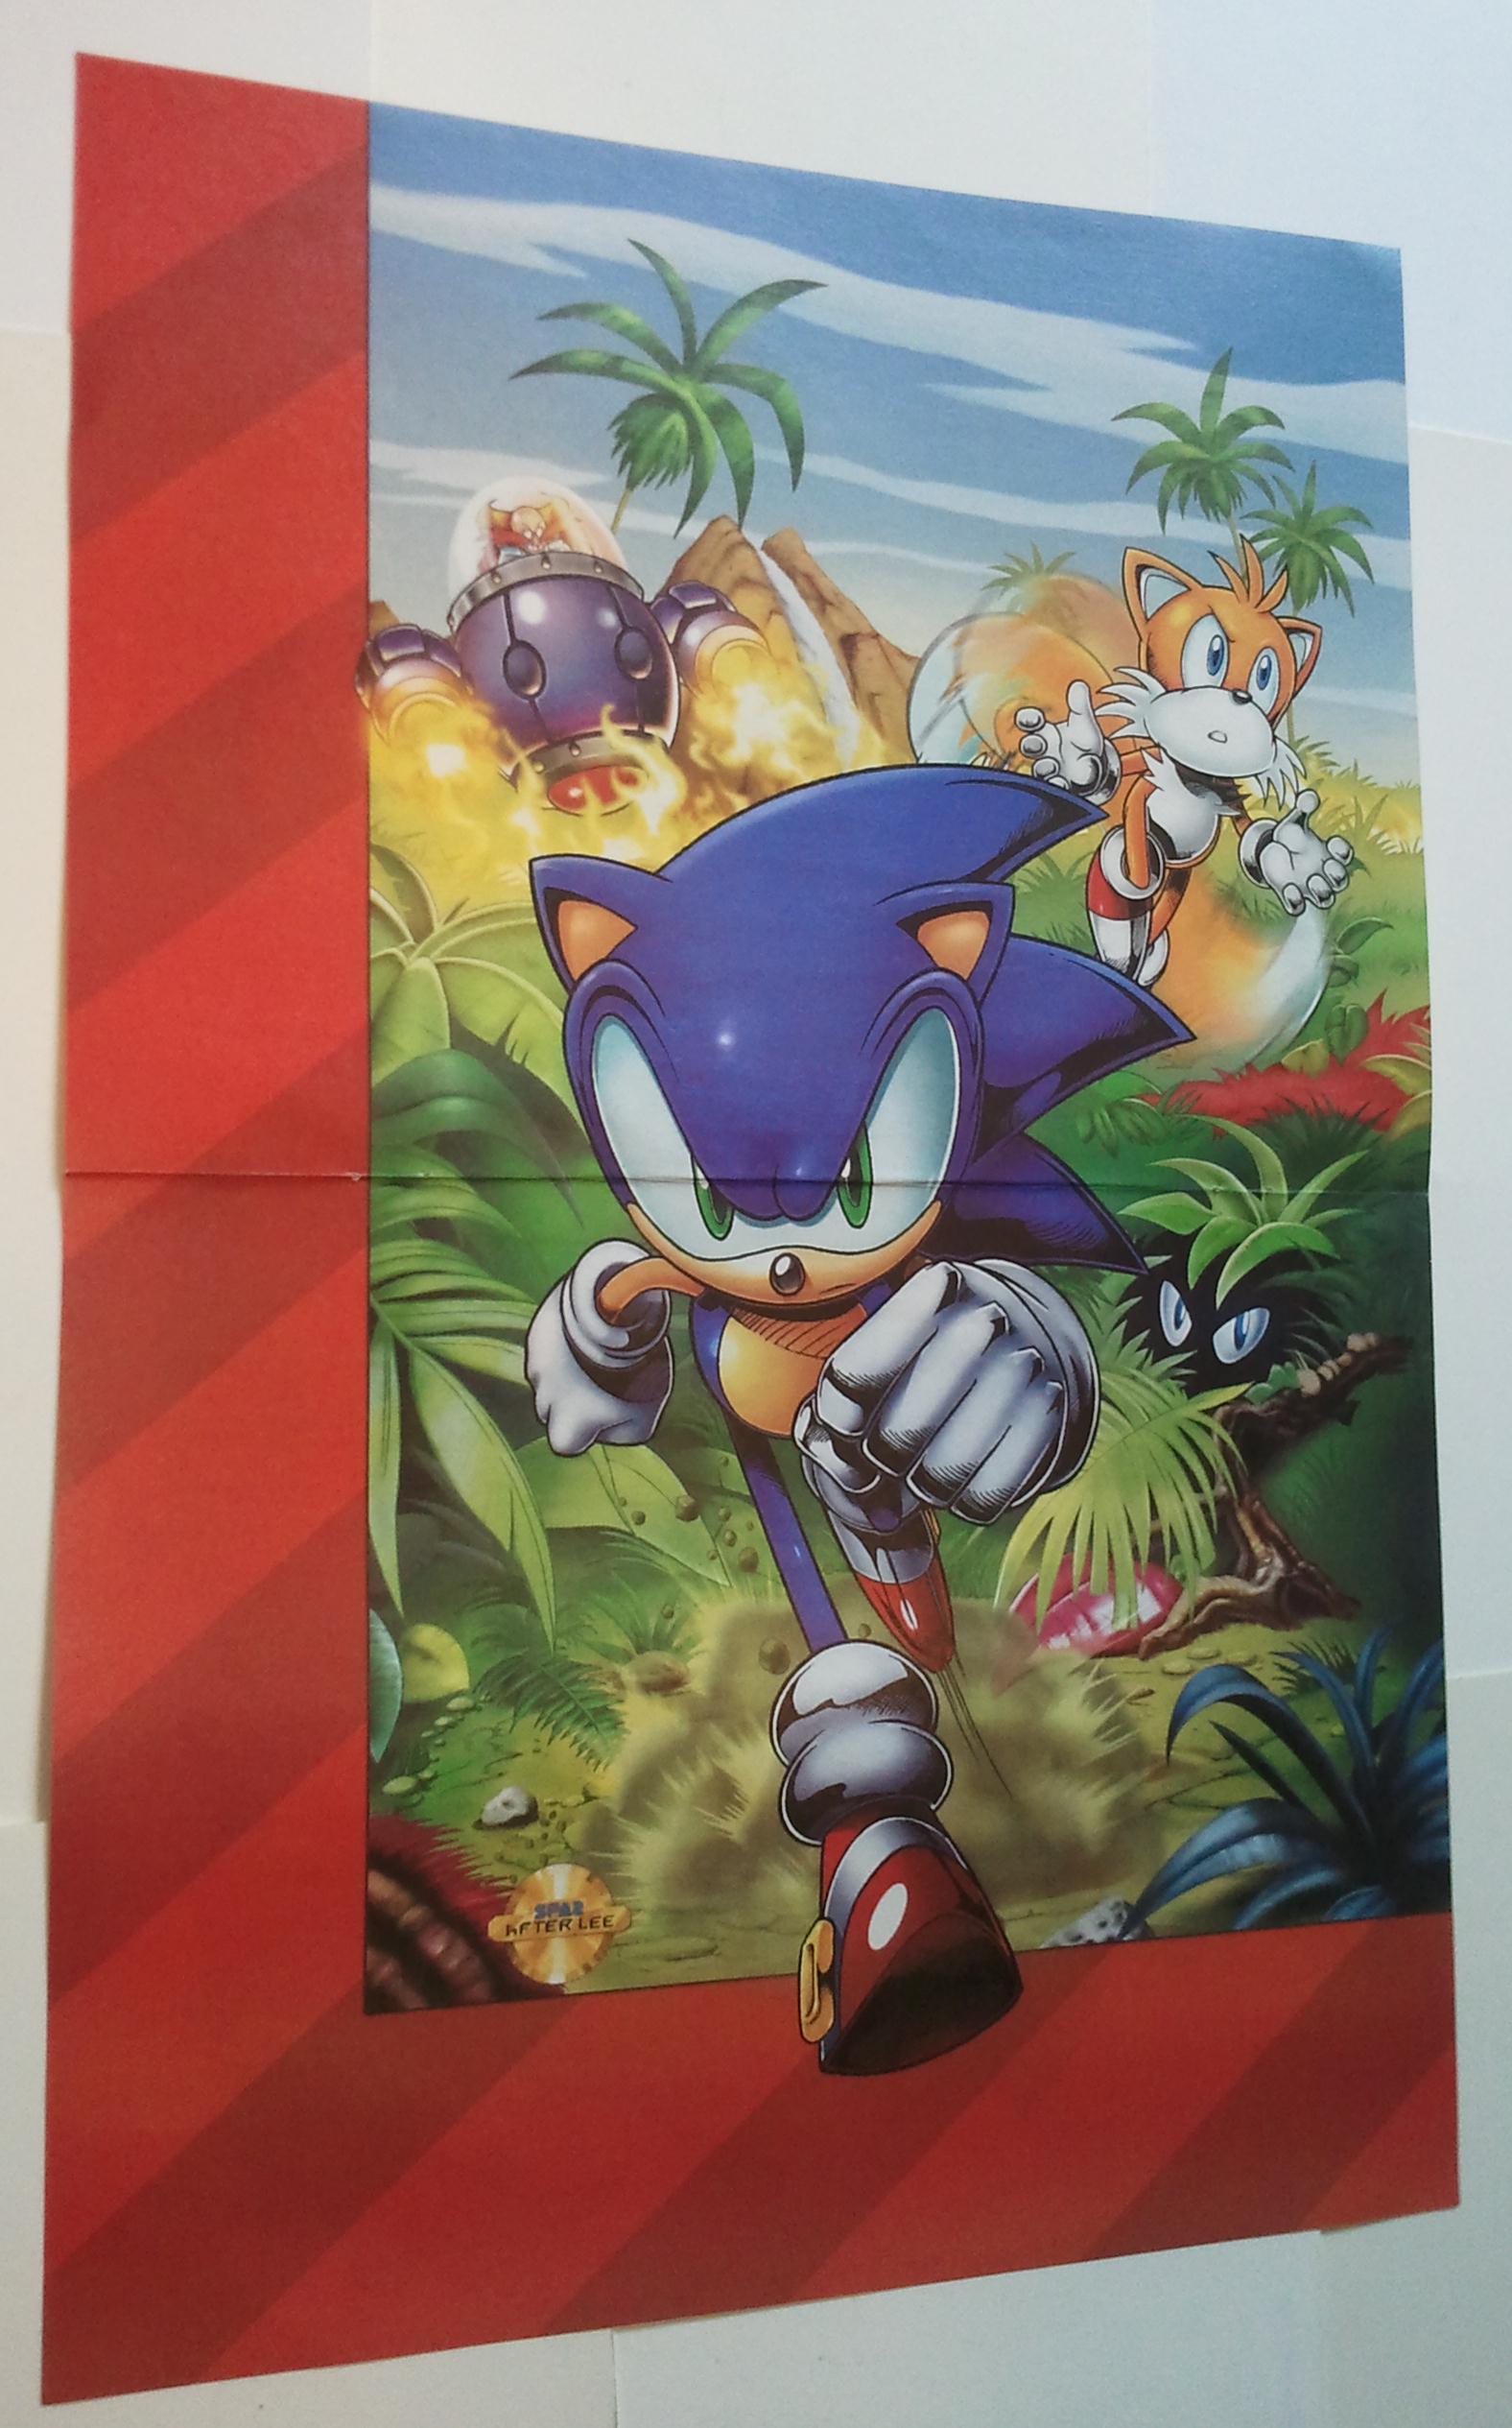 Sonic the Hedgehog Poster #15 Sonic and Tails vs Dr. Robotnik Frontiers Movie  3